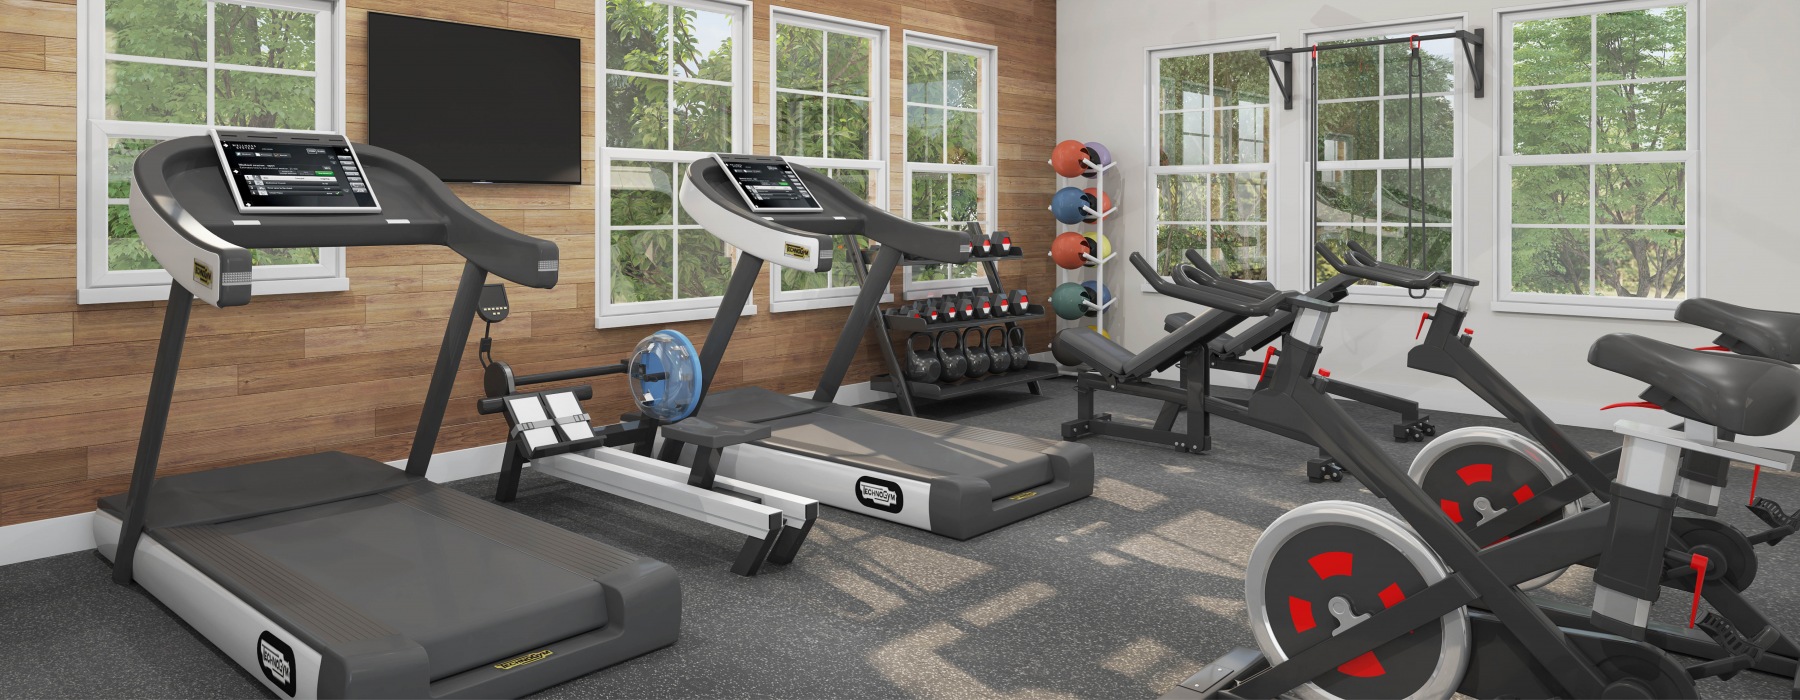 Fitness Center At Beacon Ridge Single Family Rentals In Plymouth, MN